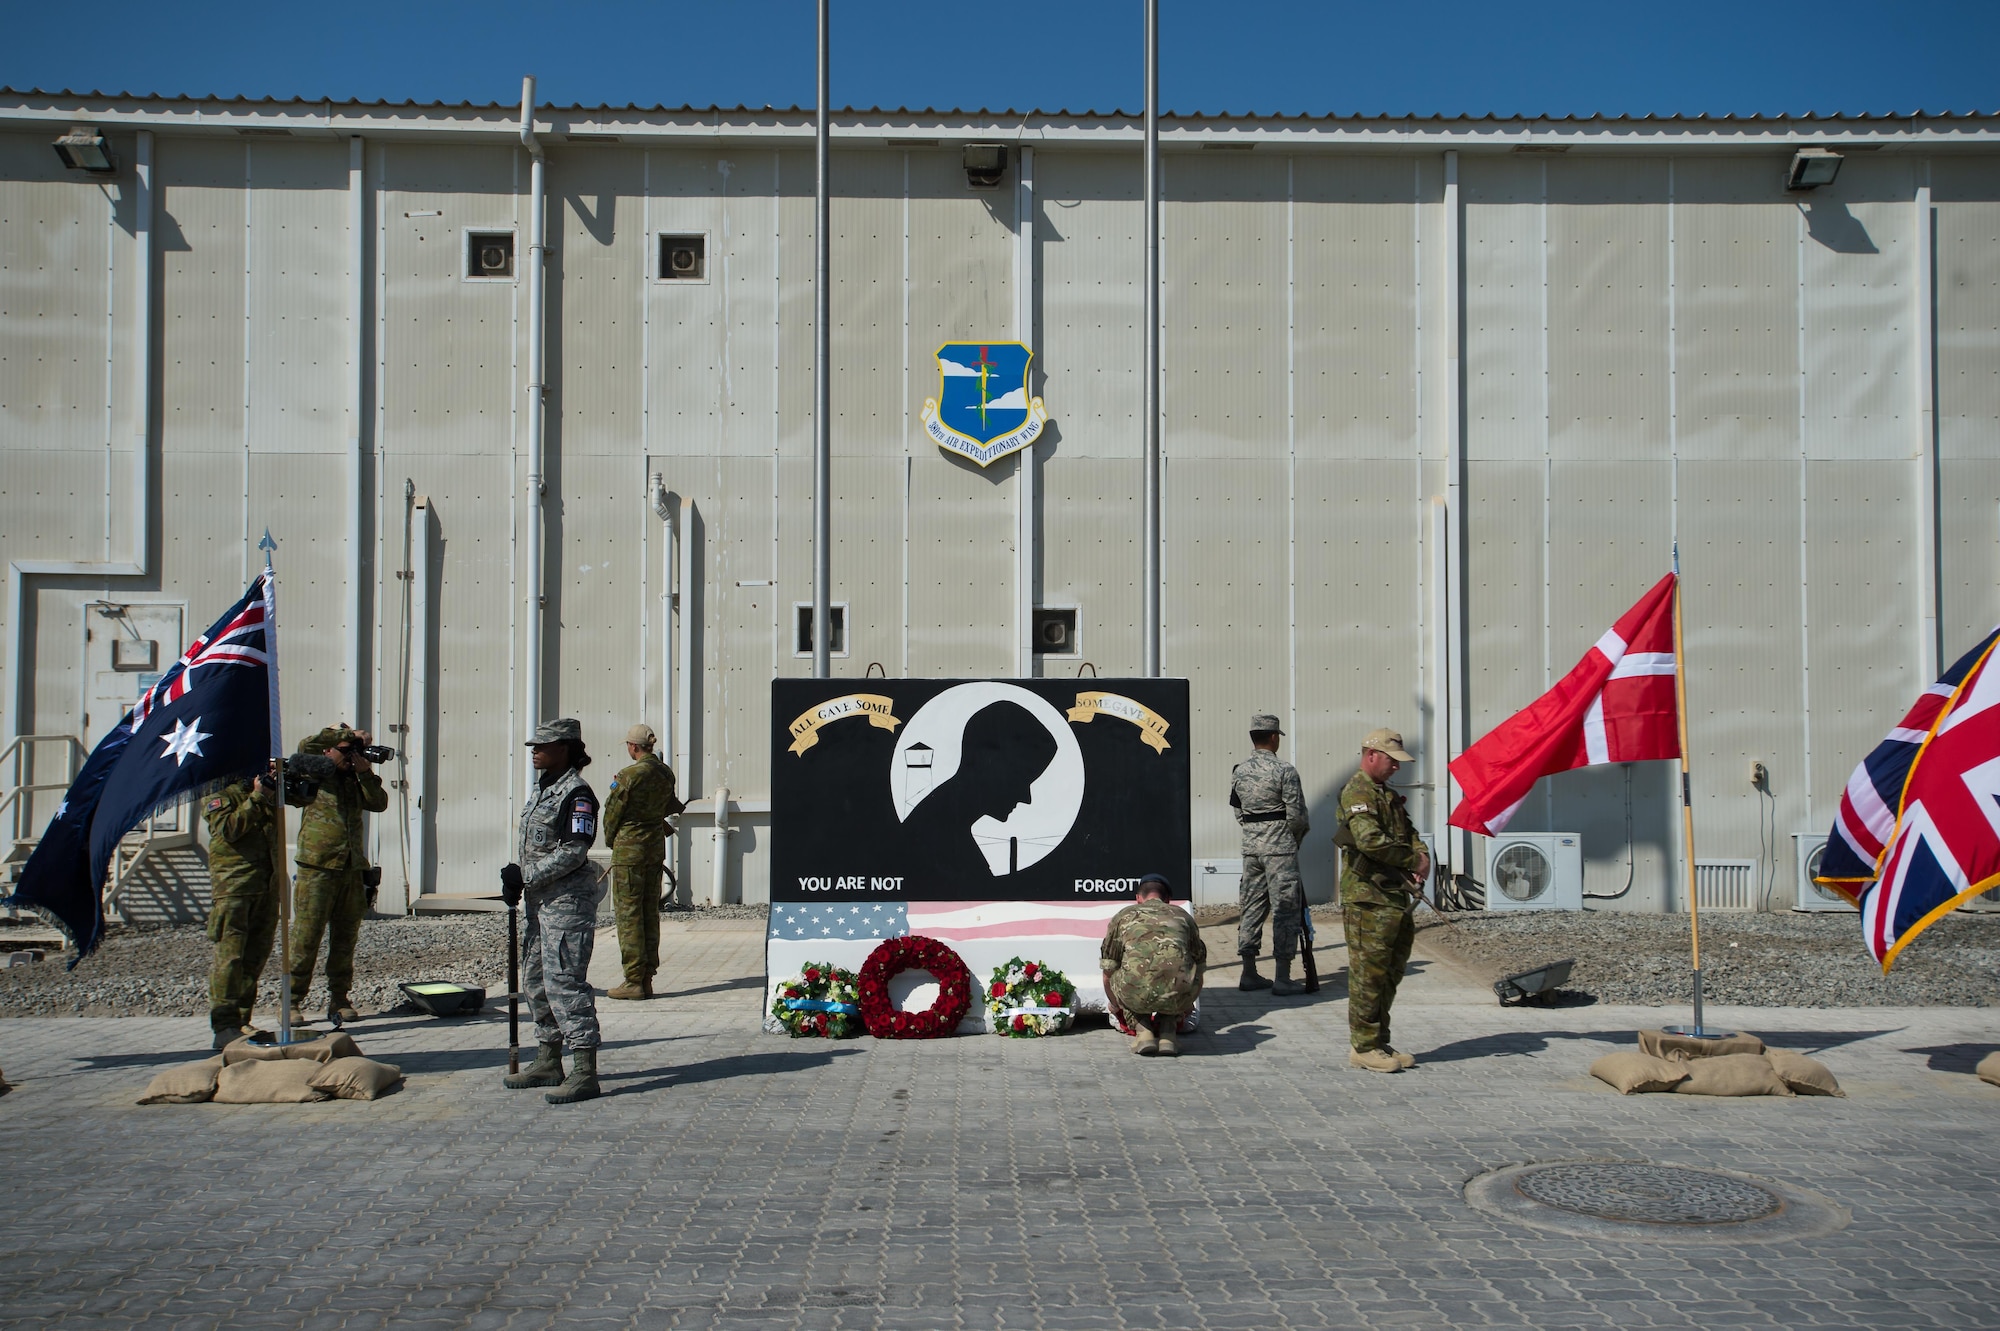 A deployed United Kingdom Coalition service member places a wreath on the base of a memorial, Nov. 11, 2016 at an undisclosed location in Southwest Asia. During the joint coalition ceremony, four nations participated in the remembrance of living and fallen veterans.  (U.S. Air Force photo by Senior Airman Tyler Woodward)